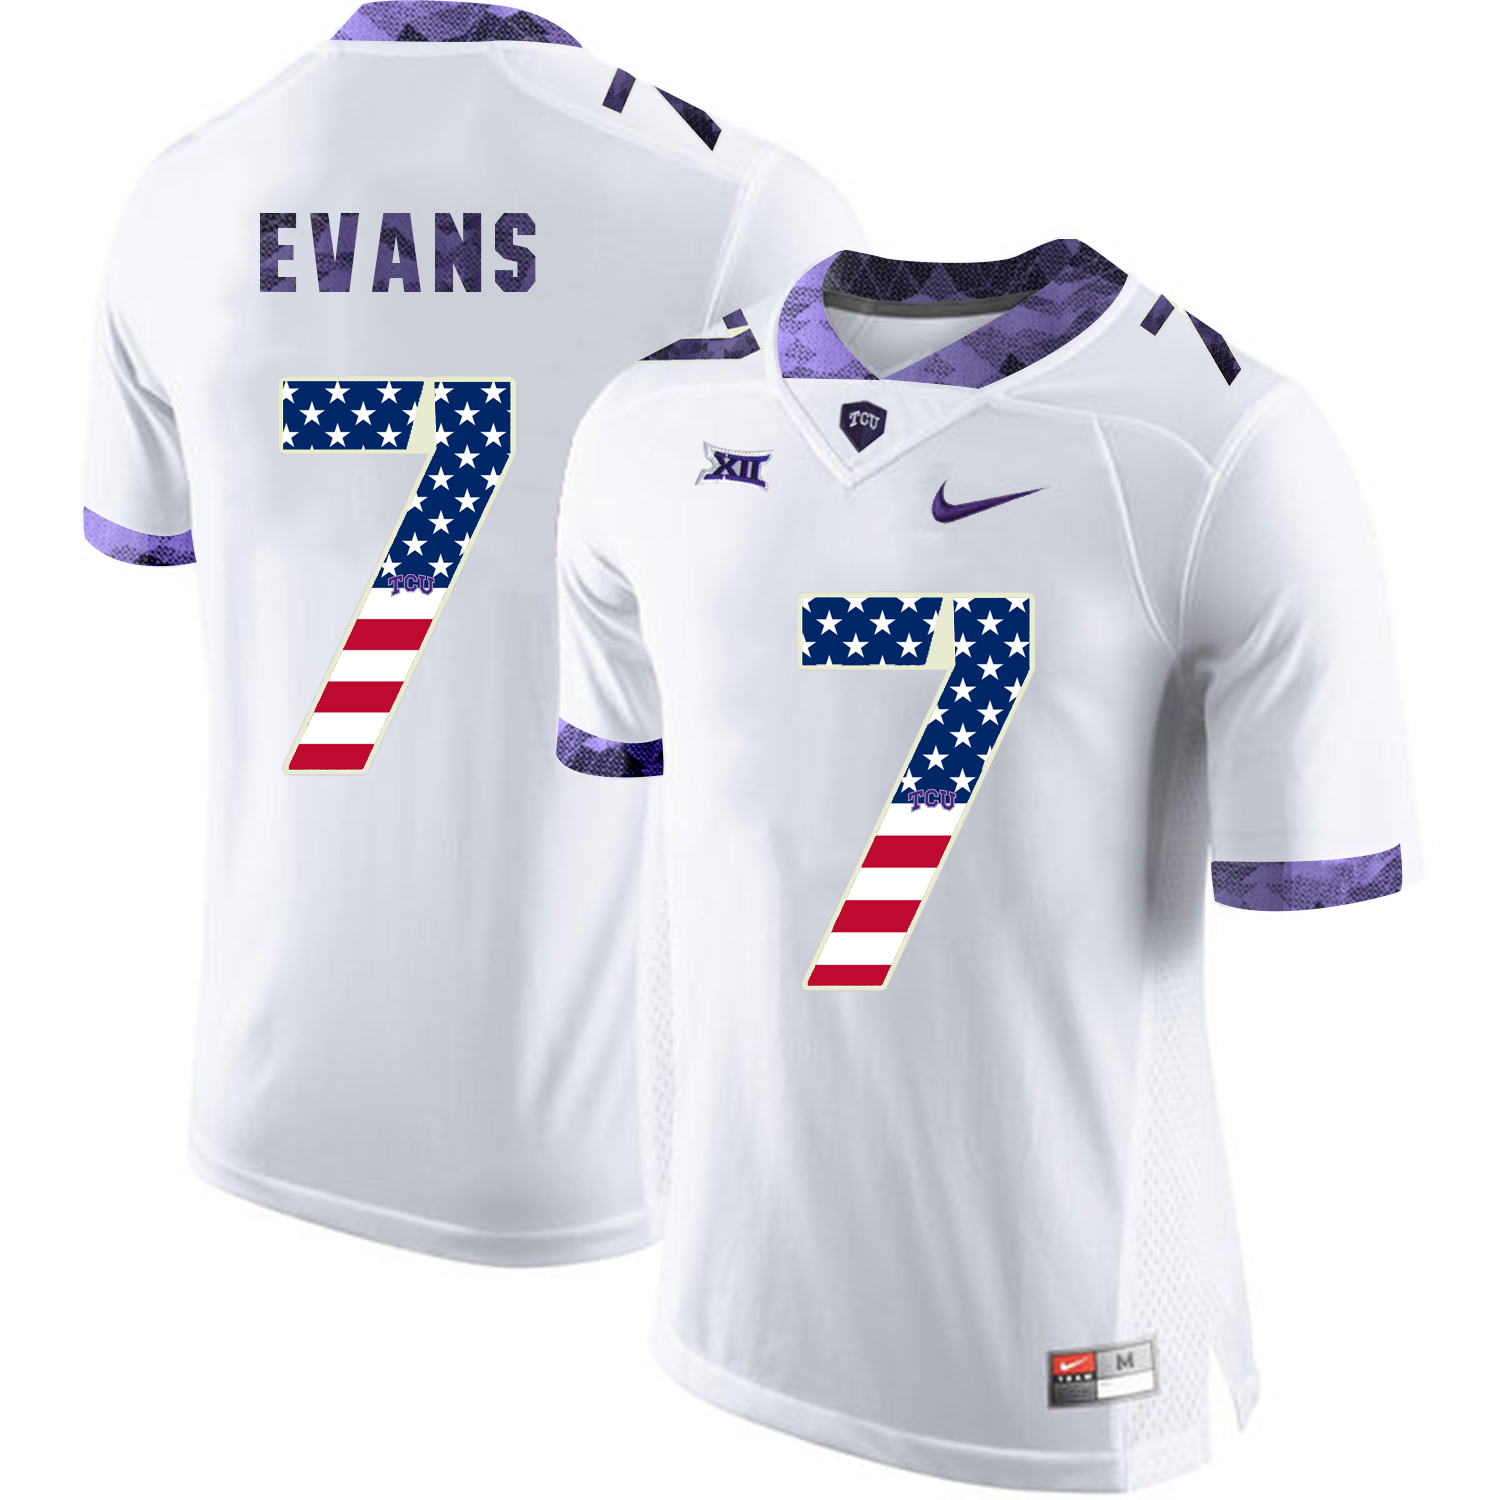 TCU Horned Frogs 7 EVANS White USA Flag College Football Jersey